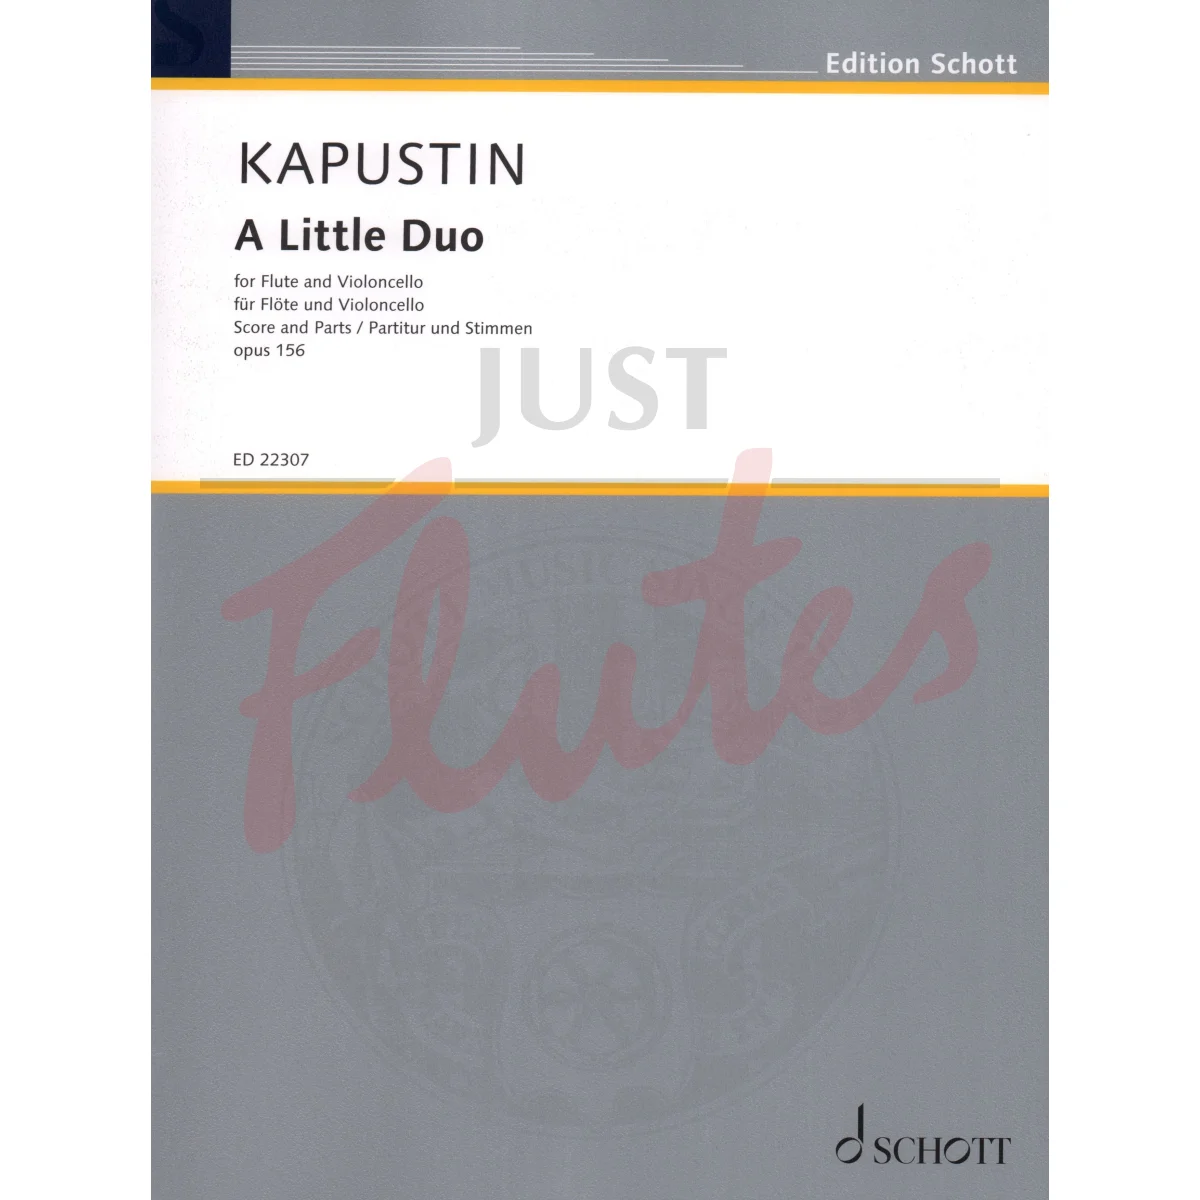 A Little Duo for Flute and Cello